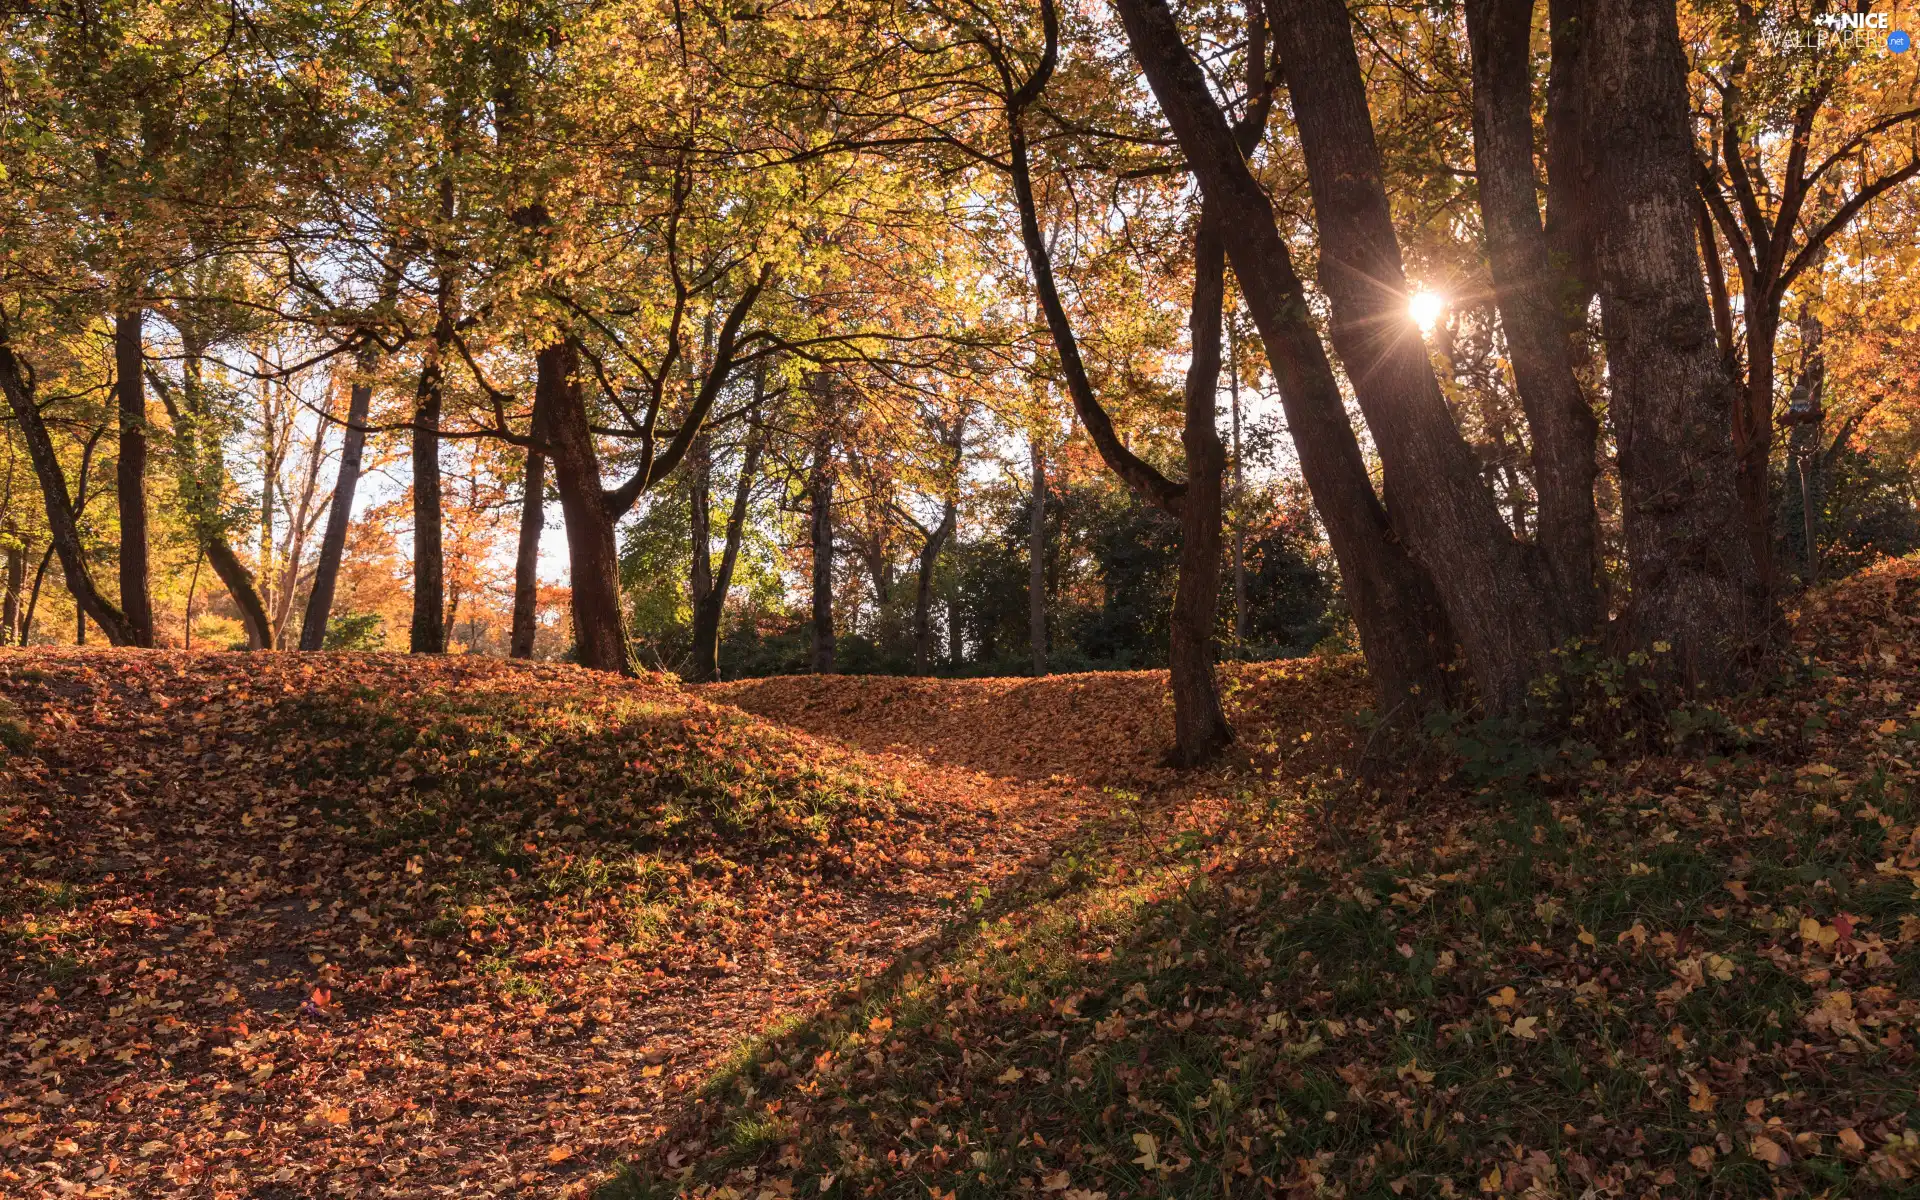 trees, viewes, rays of the Sun, fallen, Path, forest, autumn, Leaf